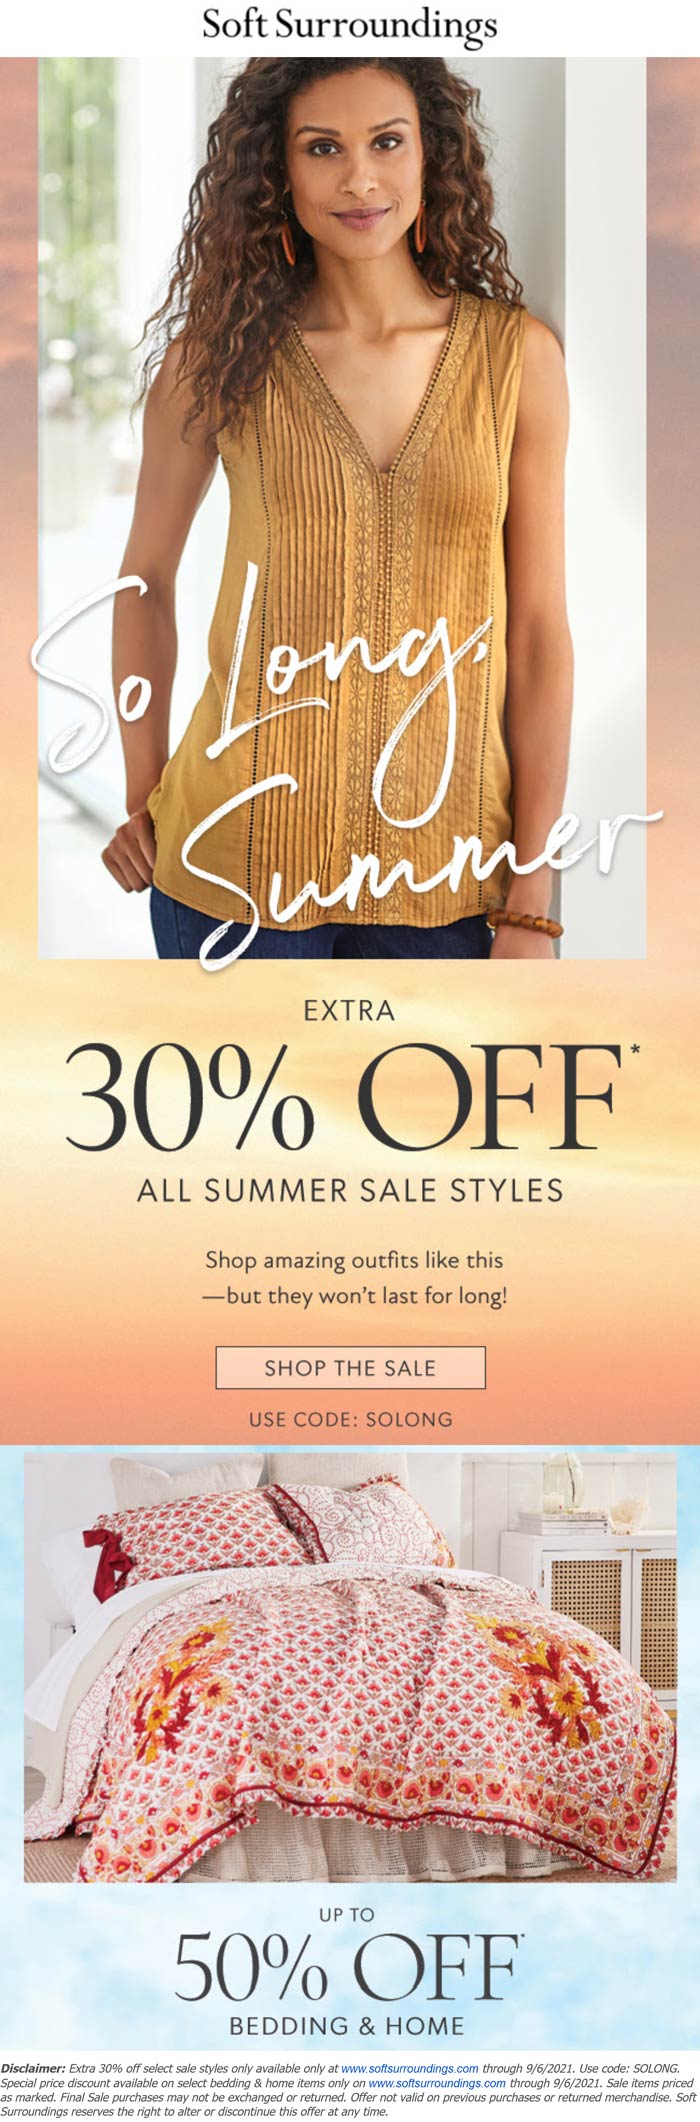 Soft Surroundings stores Coupon  Extra 30% off sale styles at Soft Surroundings via promo code SOLONG #softsurroundings 